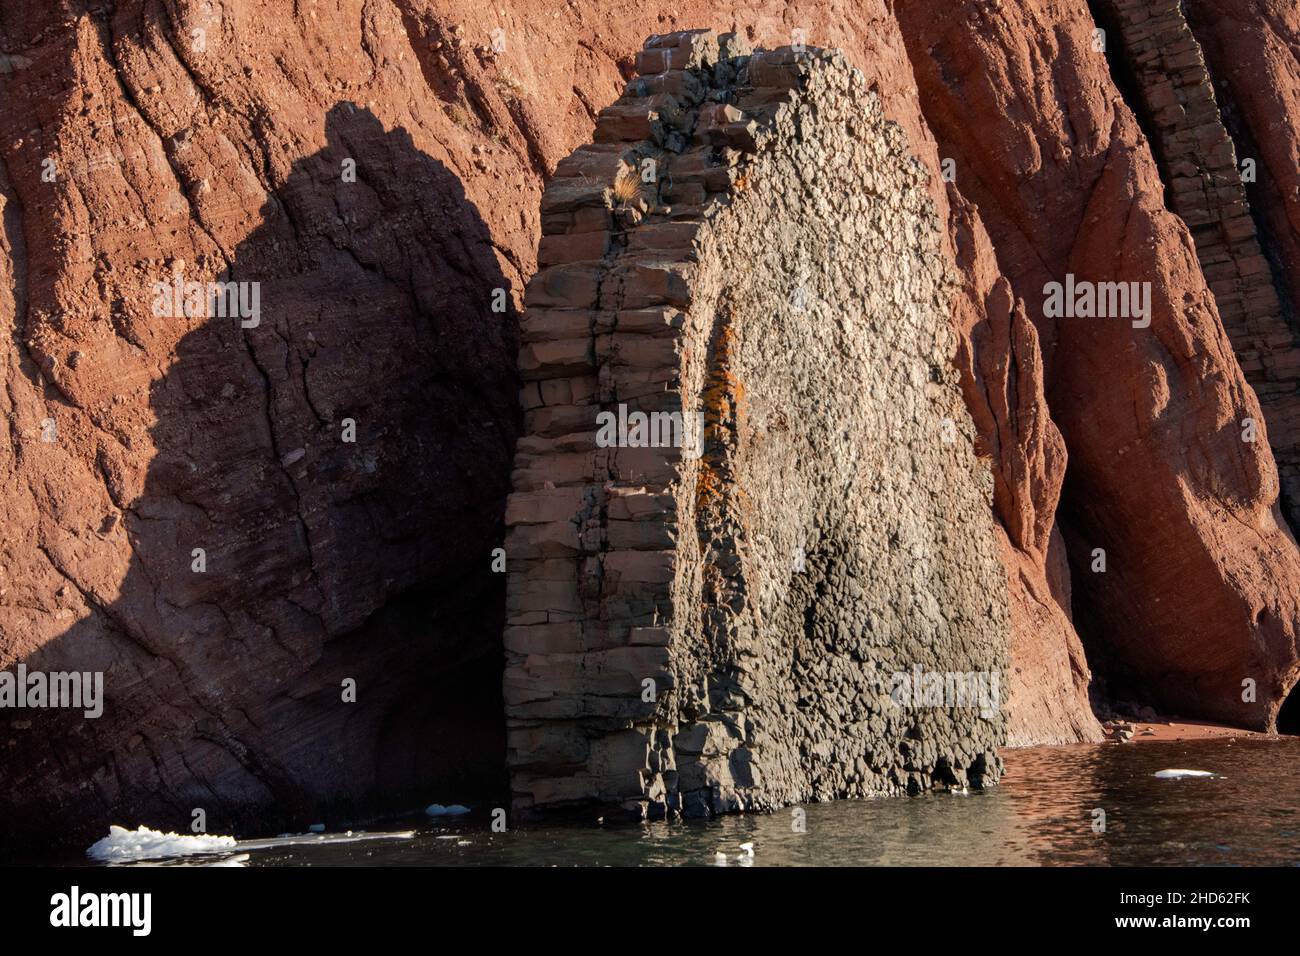 Columnar basaltic dykes, Rode O, Rodefjord, Scoresby Sund, East Greenland Stock Photo